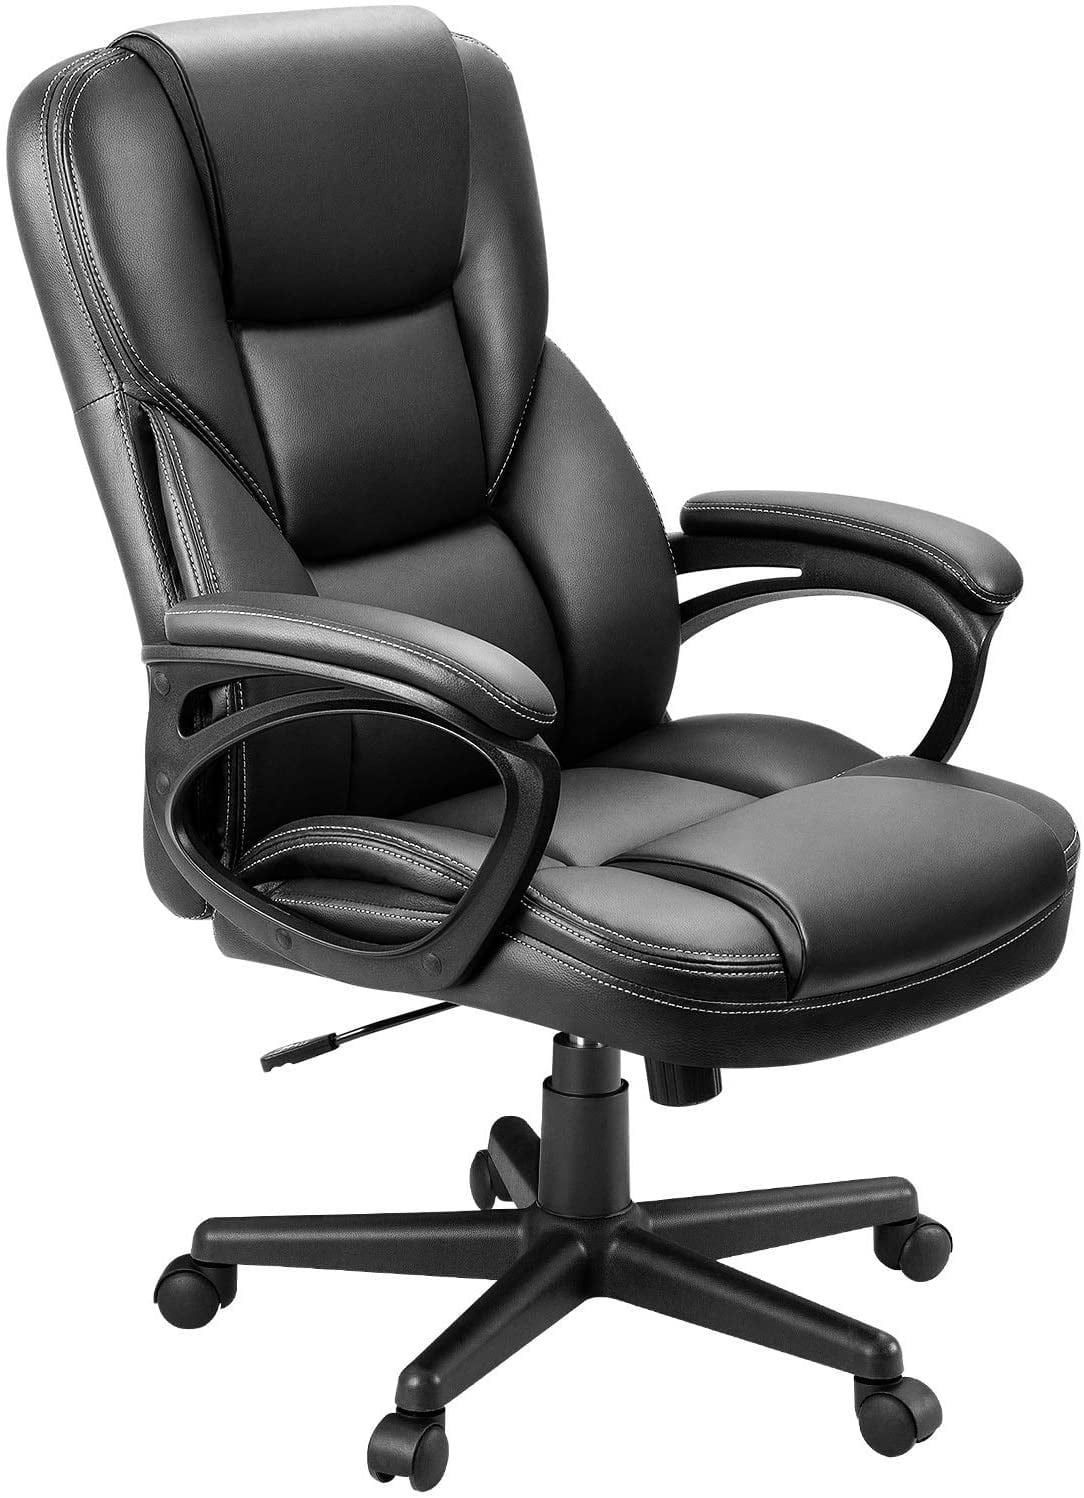 Chair Ergonomic Swivel Computer, Leather Executive Office Chair High Back